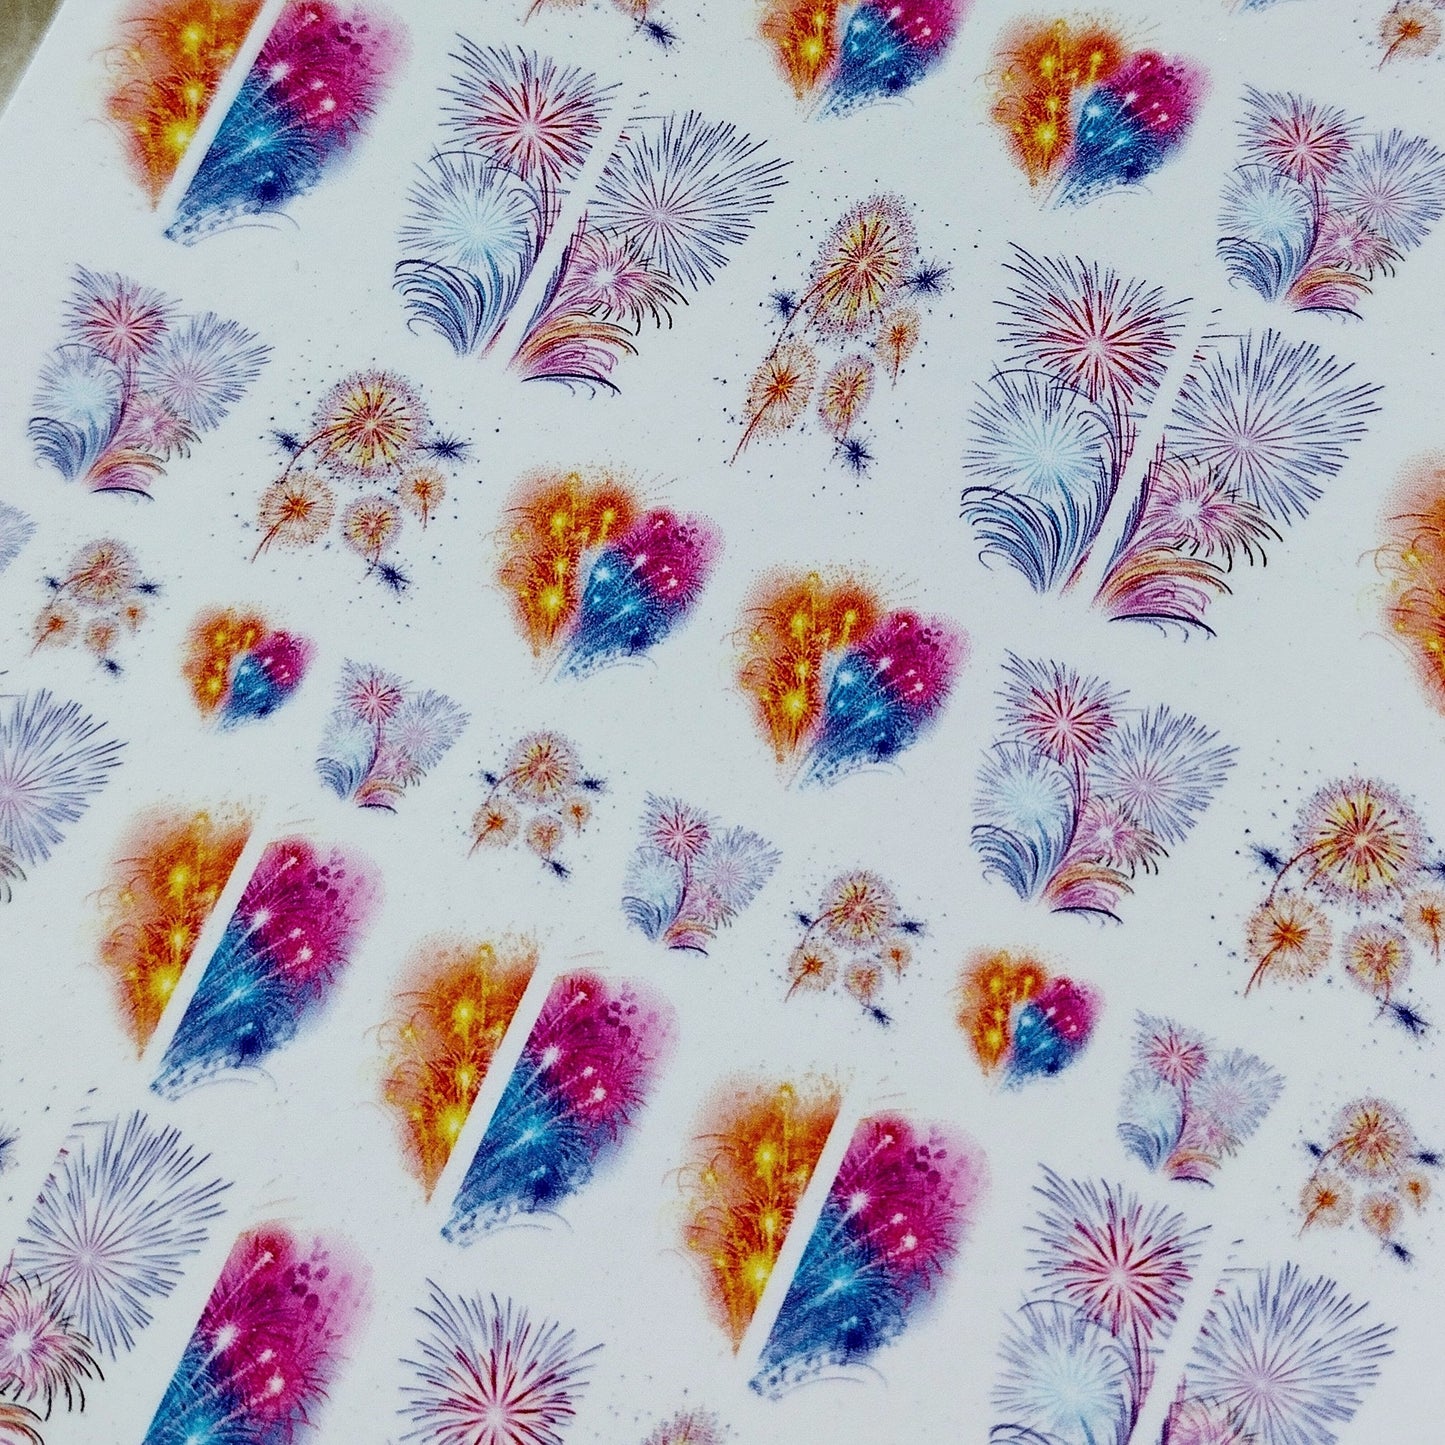 Colorful Fireworks Decals For Nails